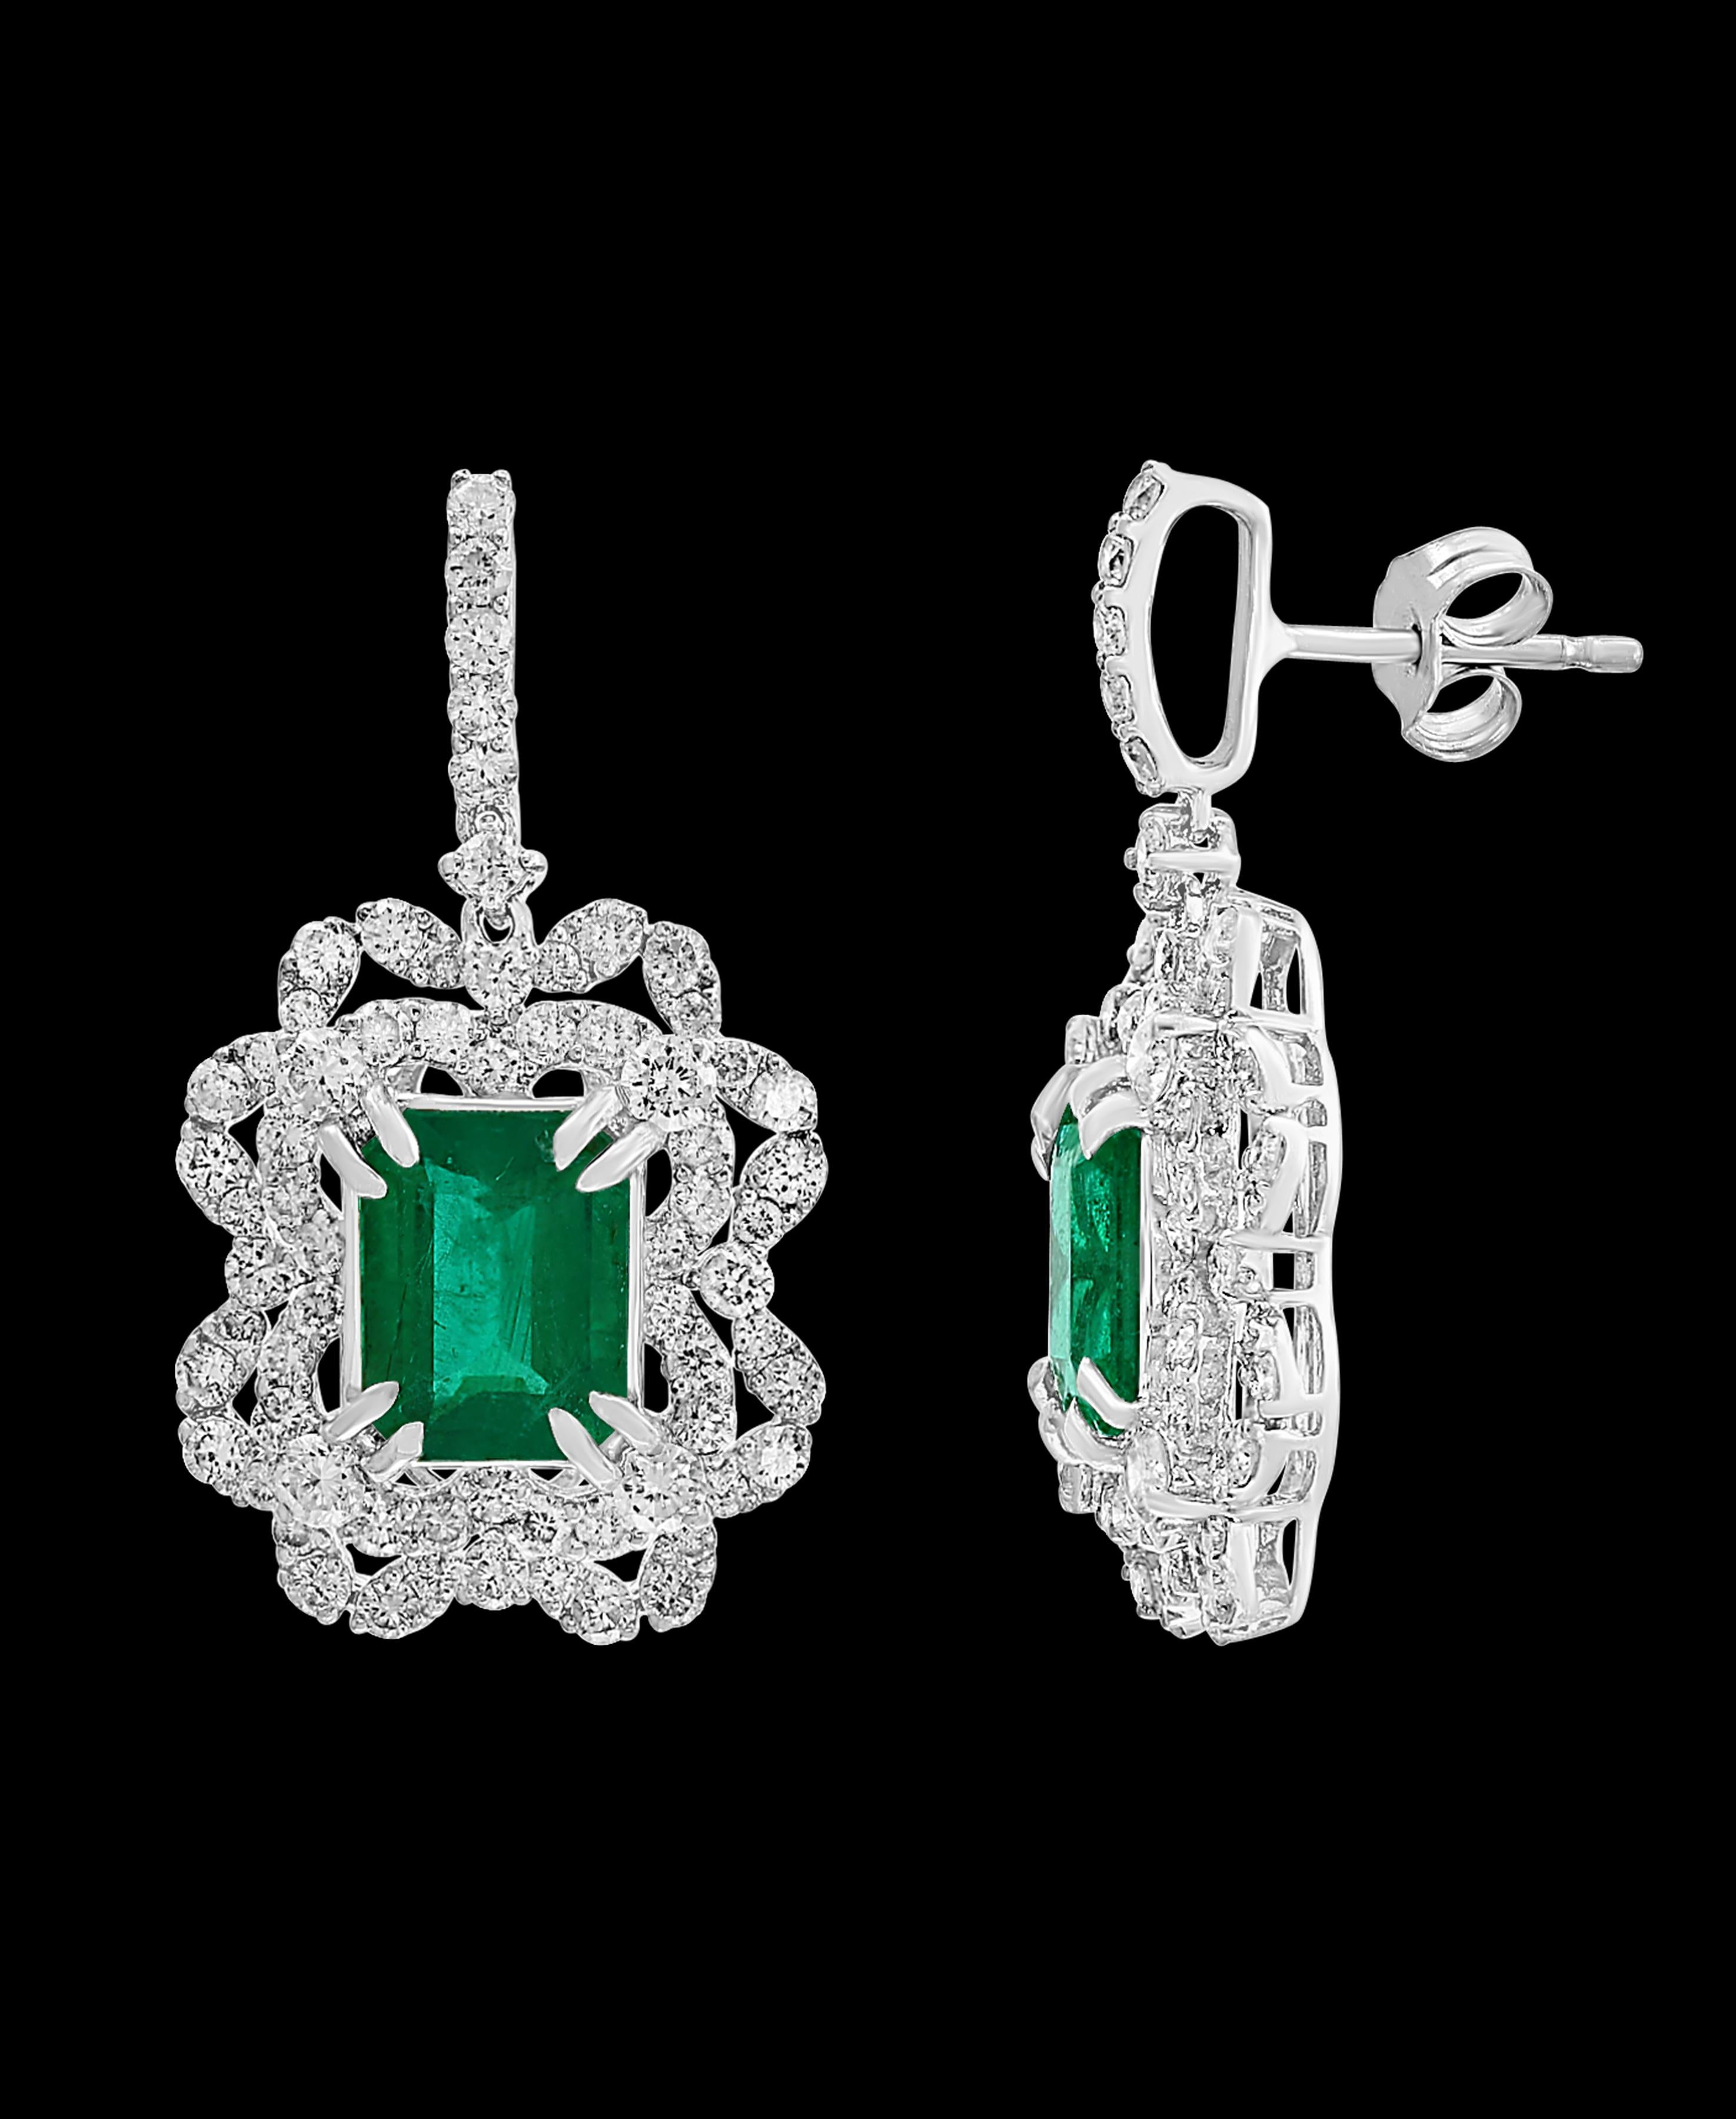 7 Carat  Colombian Emerald Cut Emerald Diamond  Hanging Earrings 18 K White Gold
This exquisite pair of earrings are beautifully crafted with 18 karat White gold  weighing  9 grams
Two fine Natural   Colombian Emerald  Cut Emeralds weighing